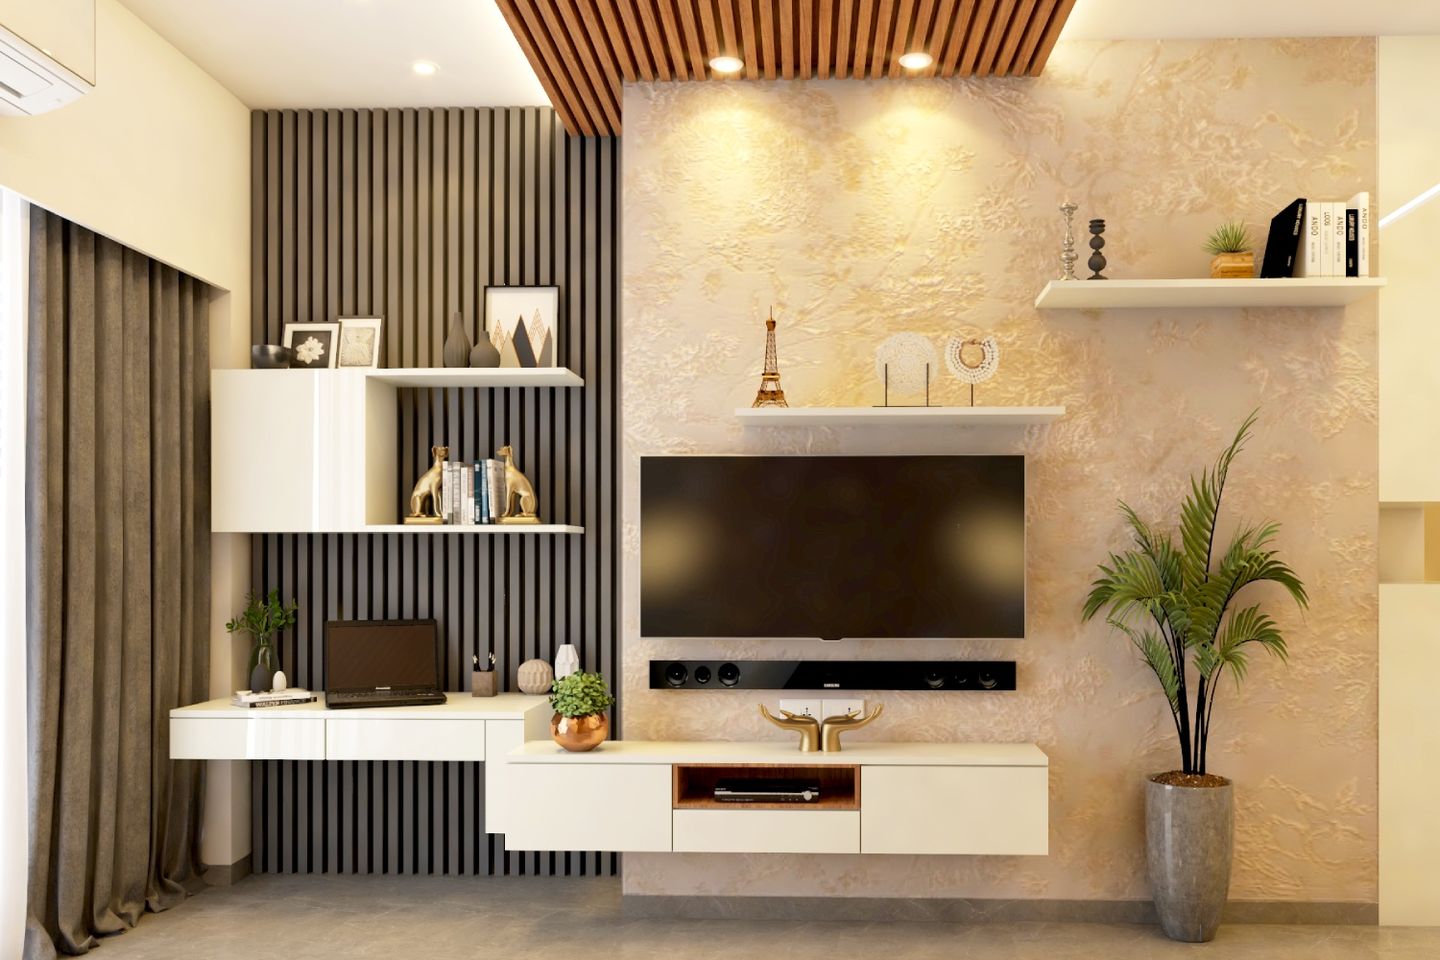 12x11 Ft Contemporary Frosty White TV Unit Design with Wall-Mounted Cabinet and Open Rack - Livspace